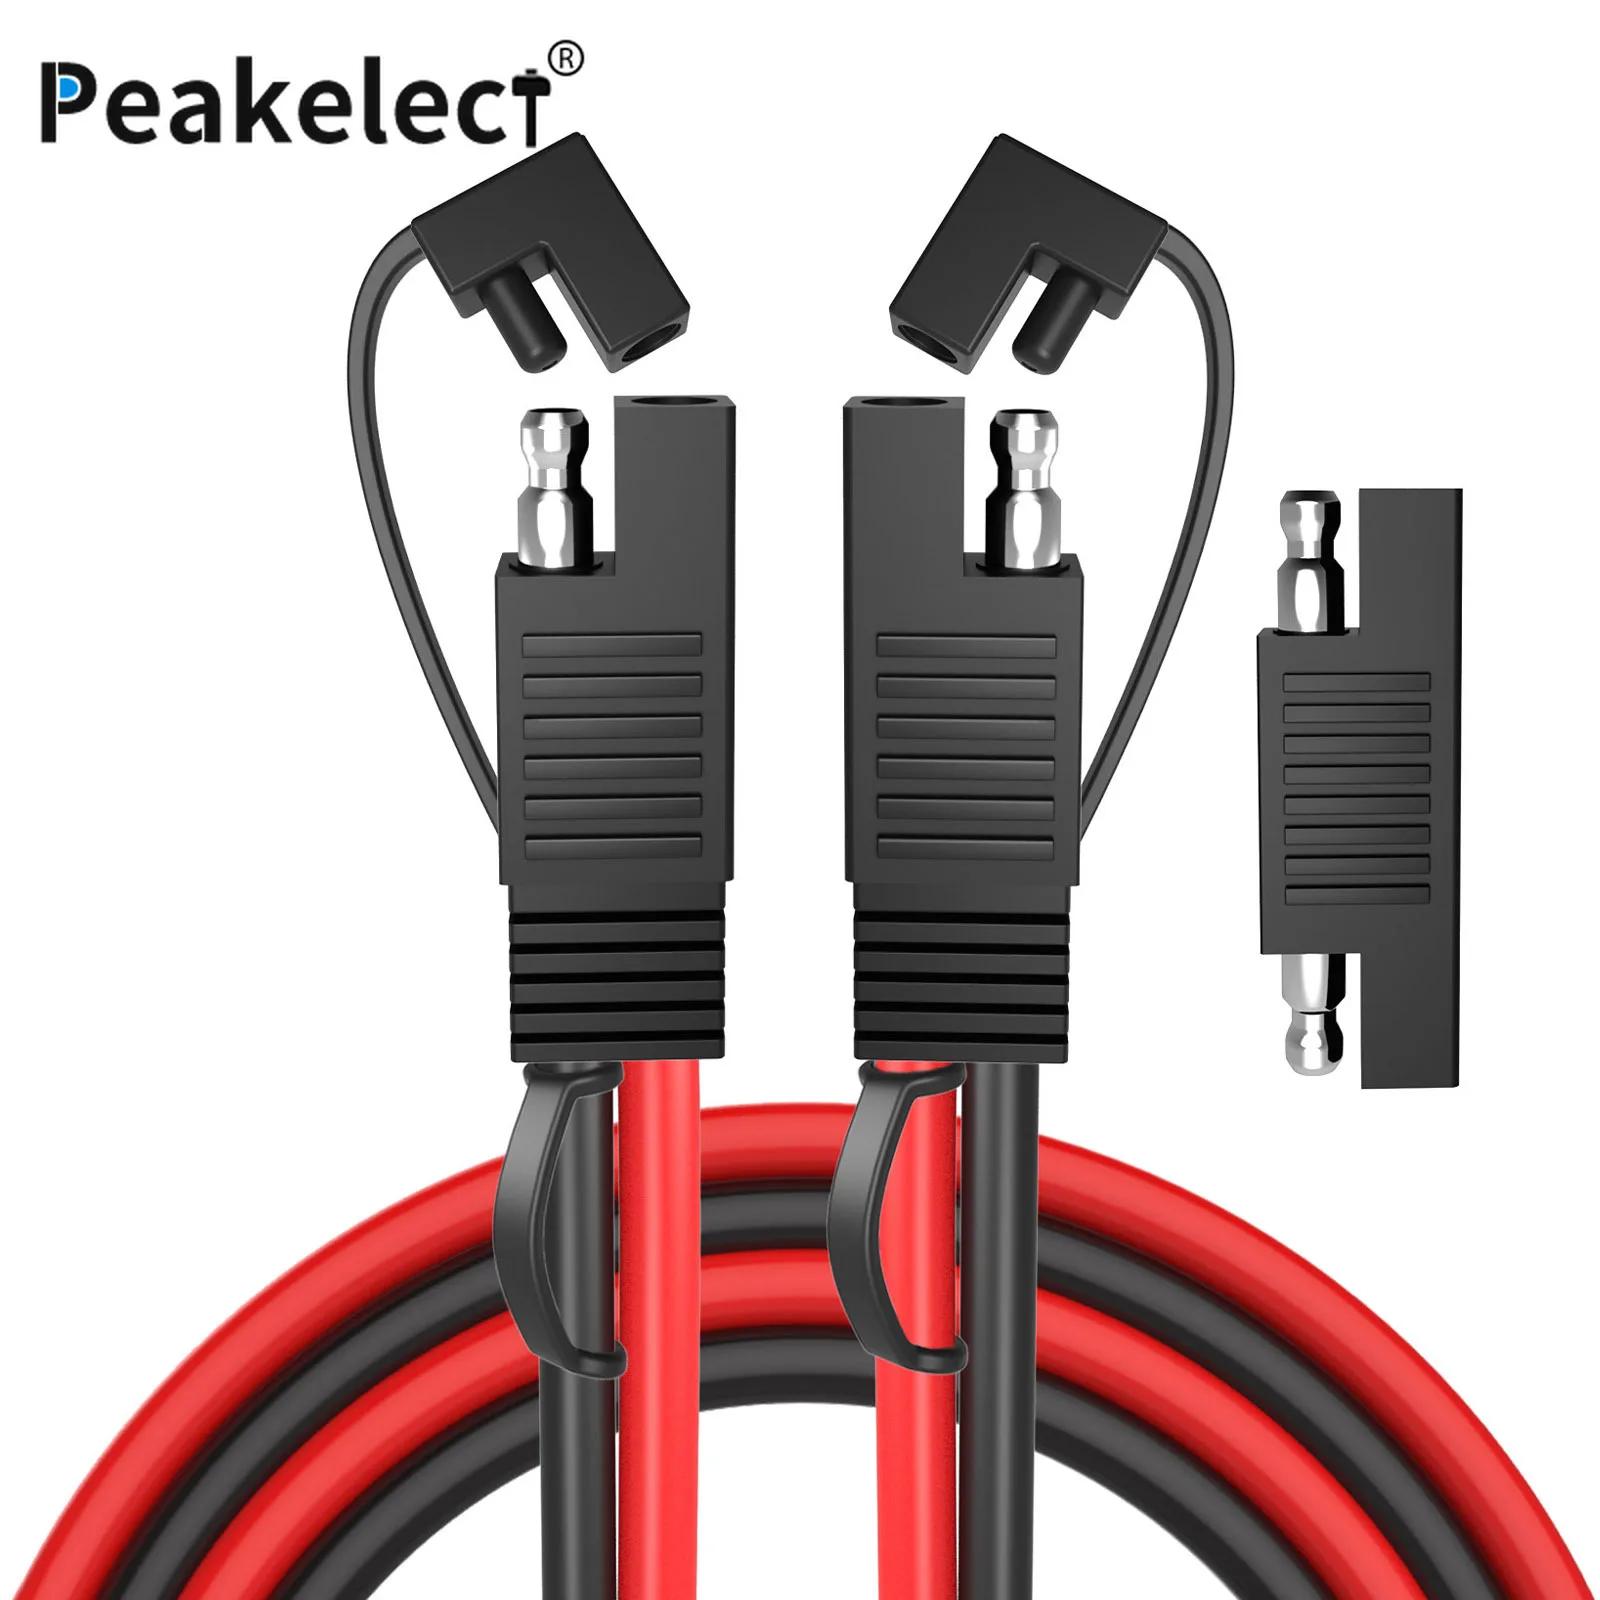 Peakelect T10073 SAE to SAE Extension Cable 10AWG Quick Disconnect WireSAE Polarity Reverse Adapter 0.3m/1m/2m/3m/6m